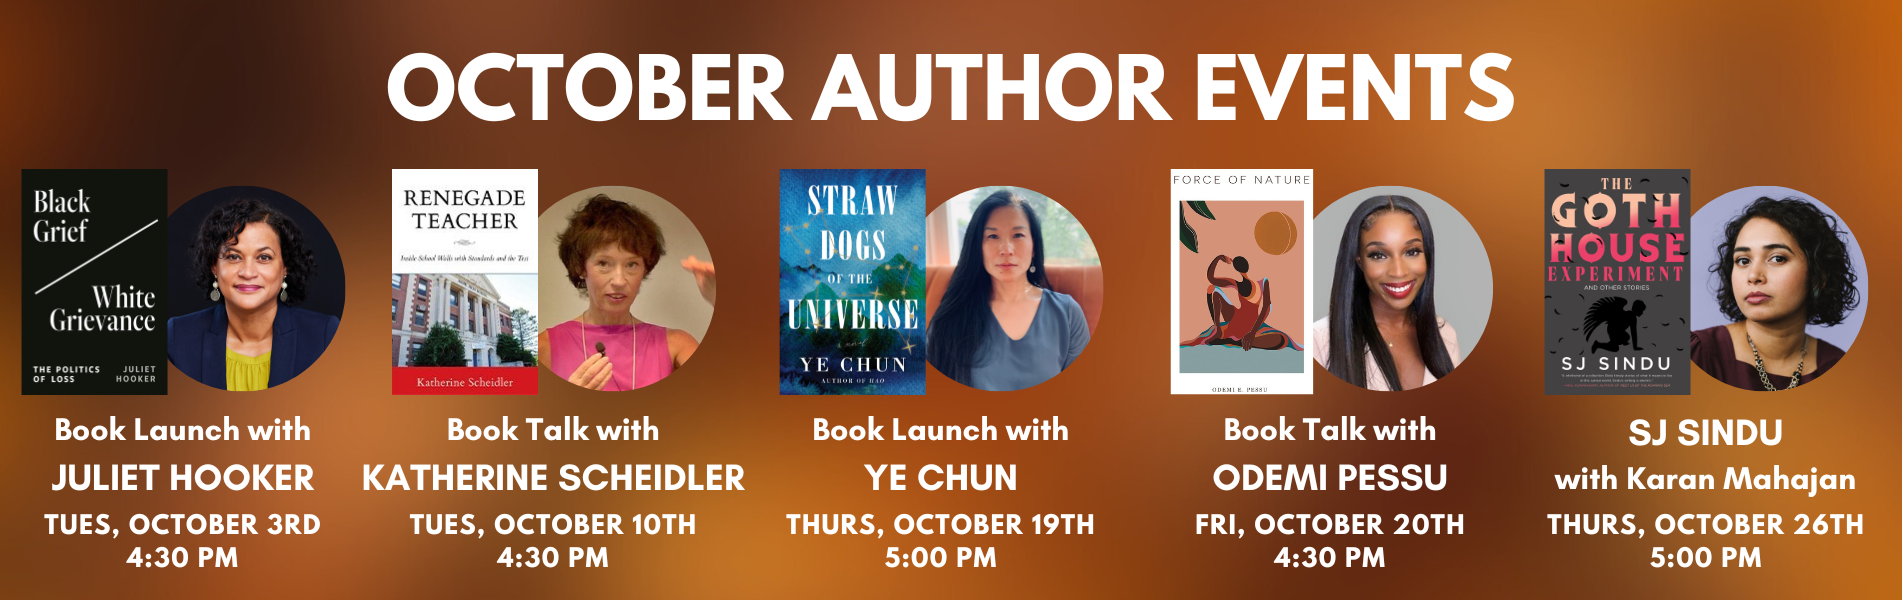 Author Events in October at the Brown Bookstore!